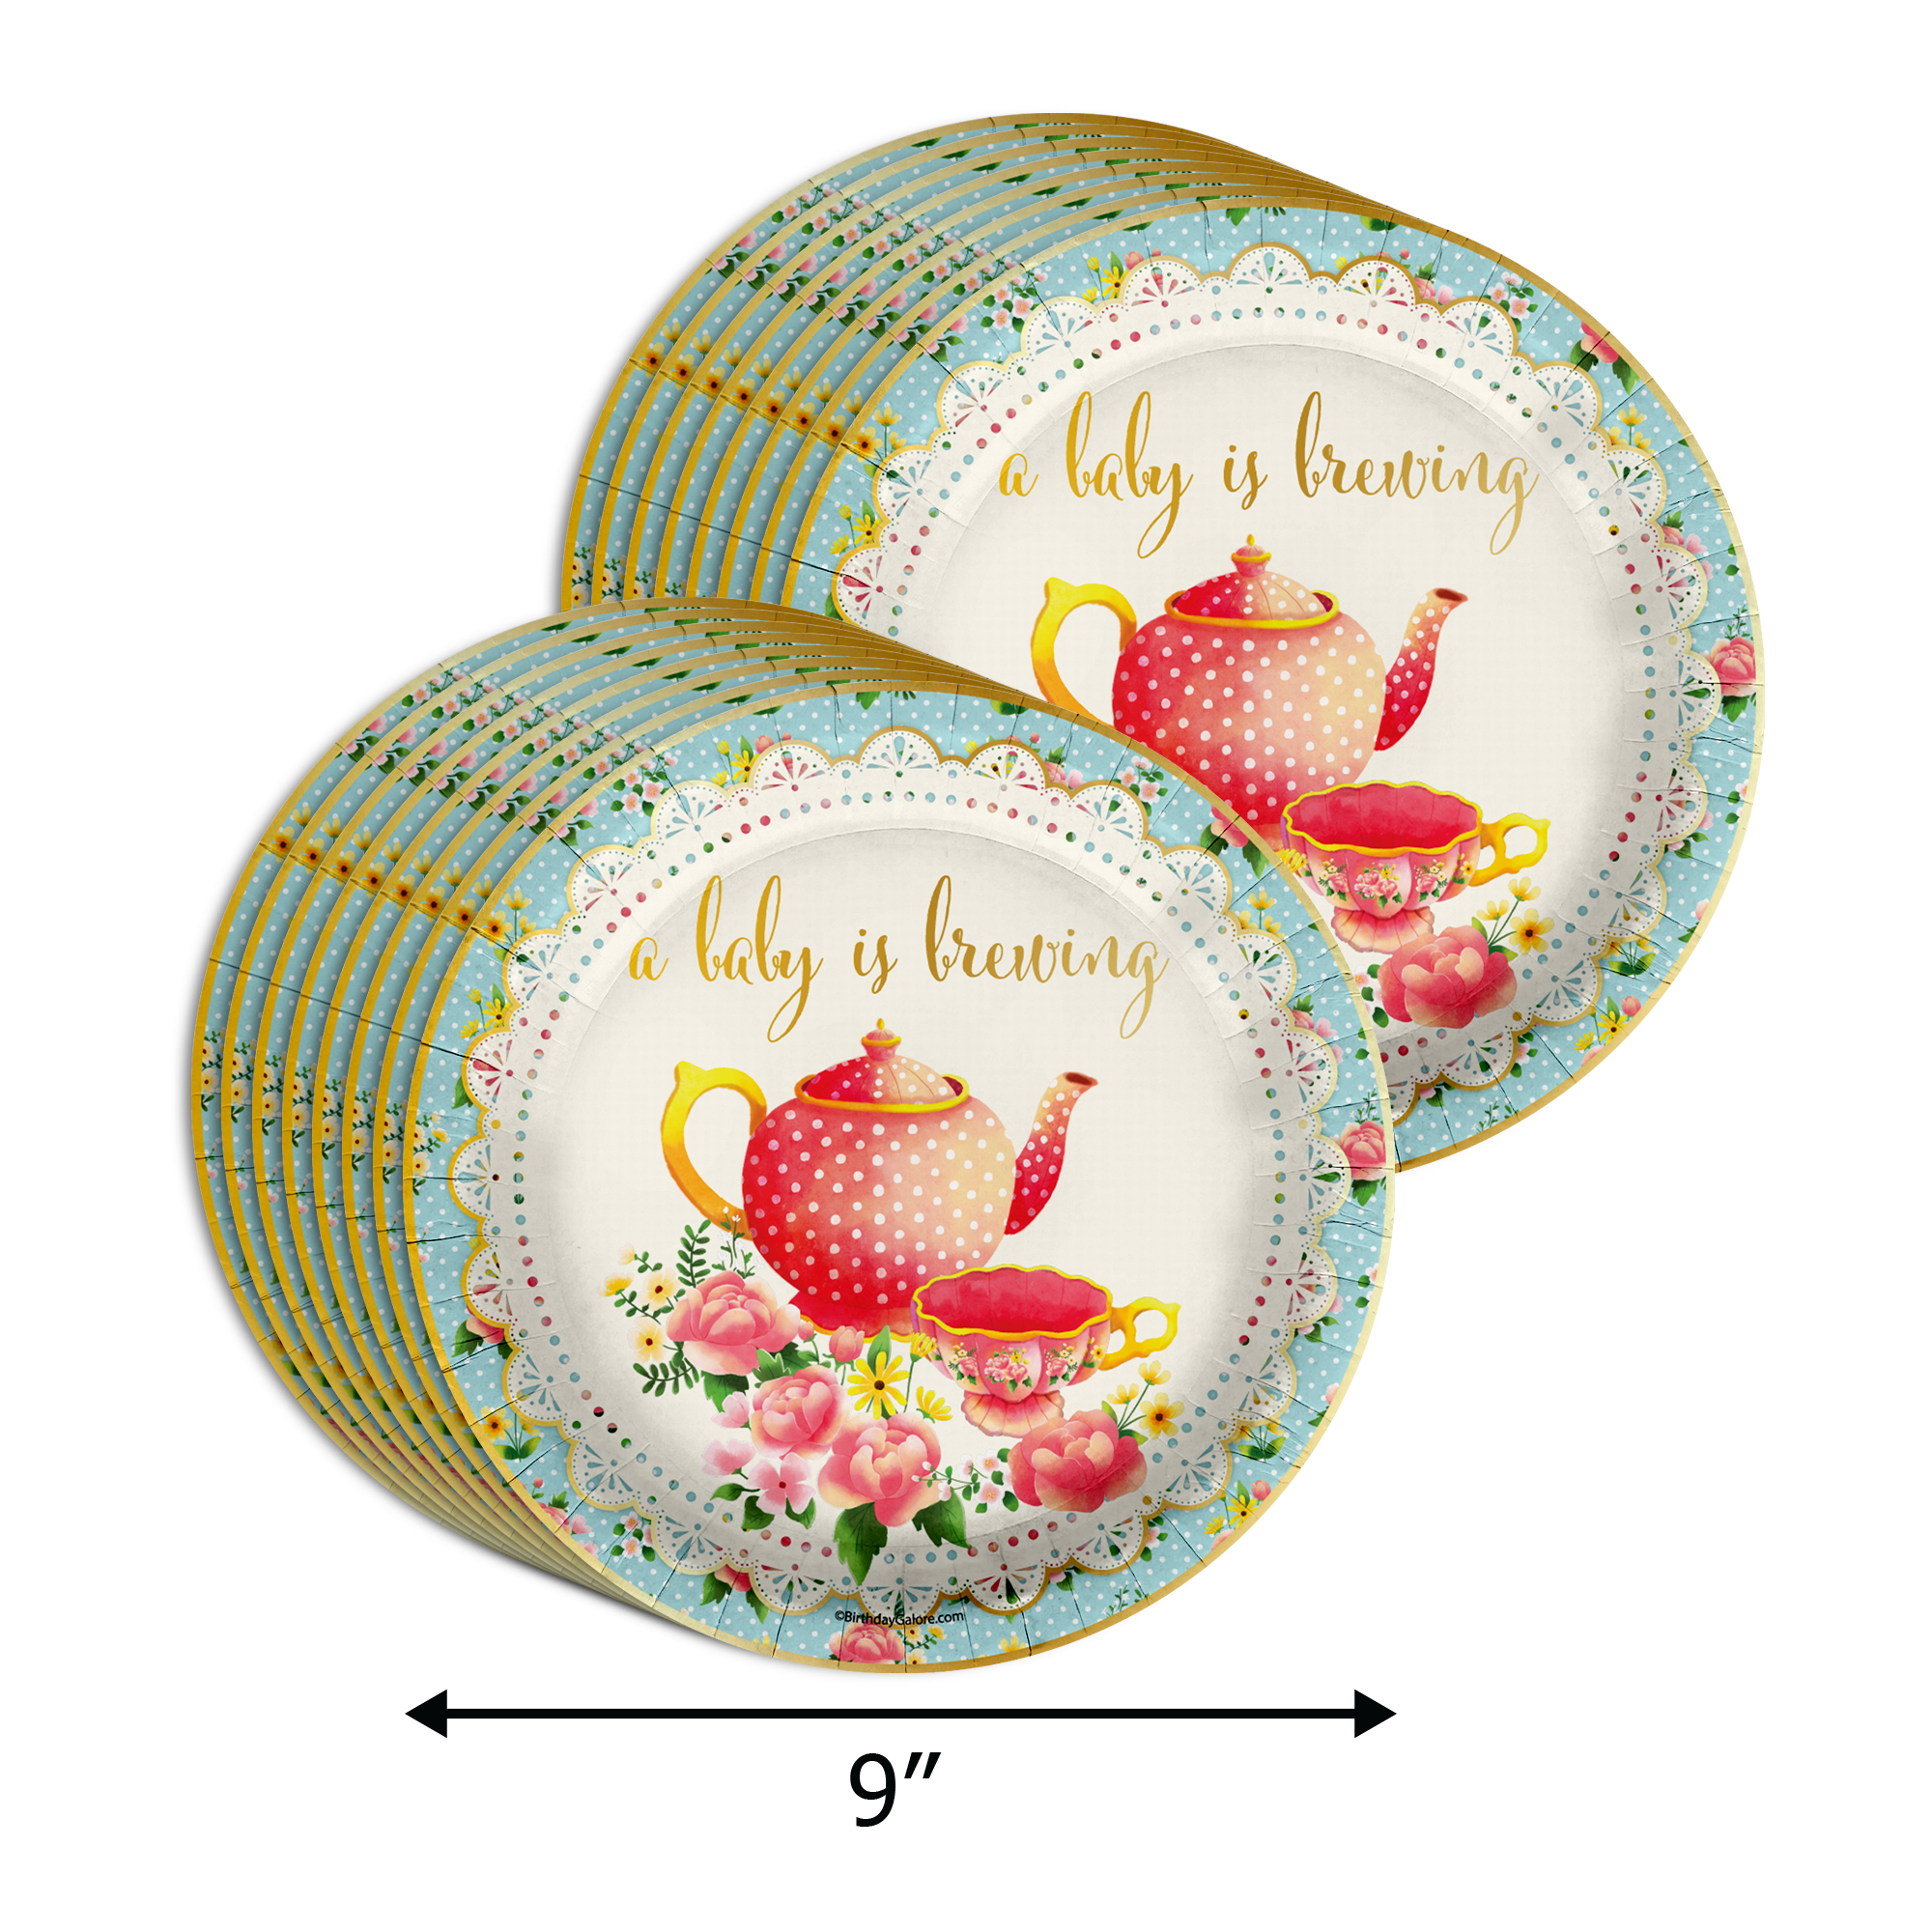 Baby is Brewing Tea Baby Shower Party Supplies 64 Piece Tableware Set Includes Large 9" Paper Plates Dessert Plates, Cups and Napkins Kit for 16